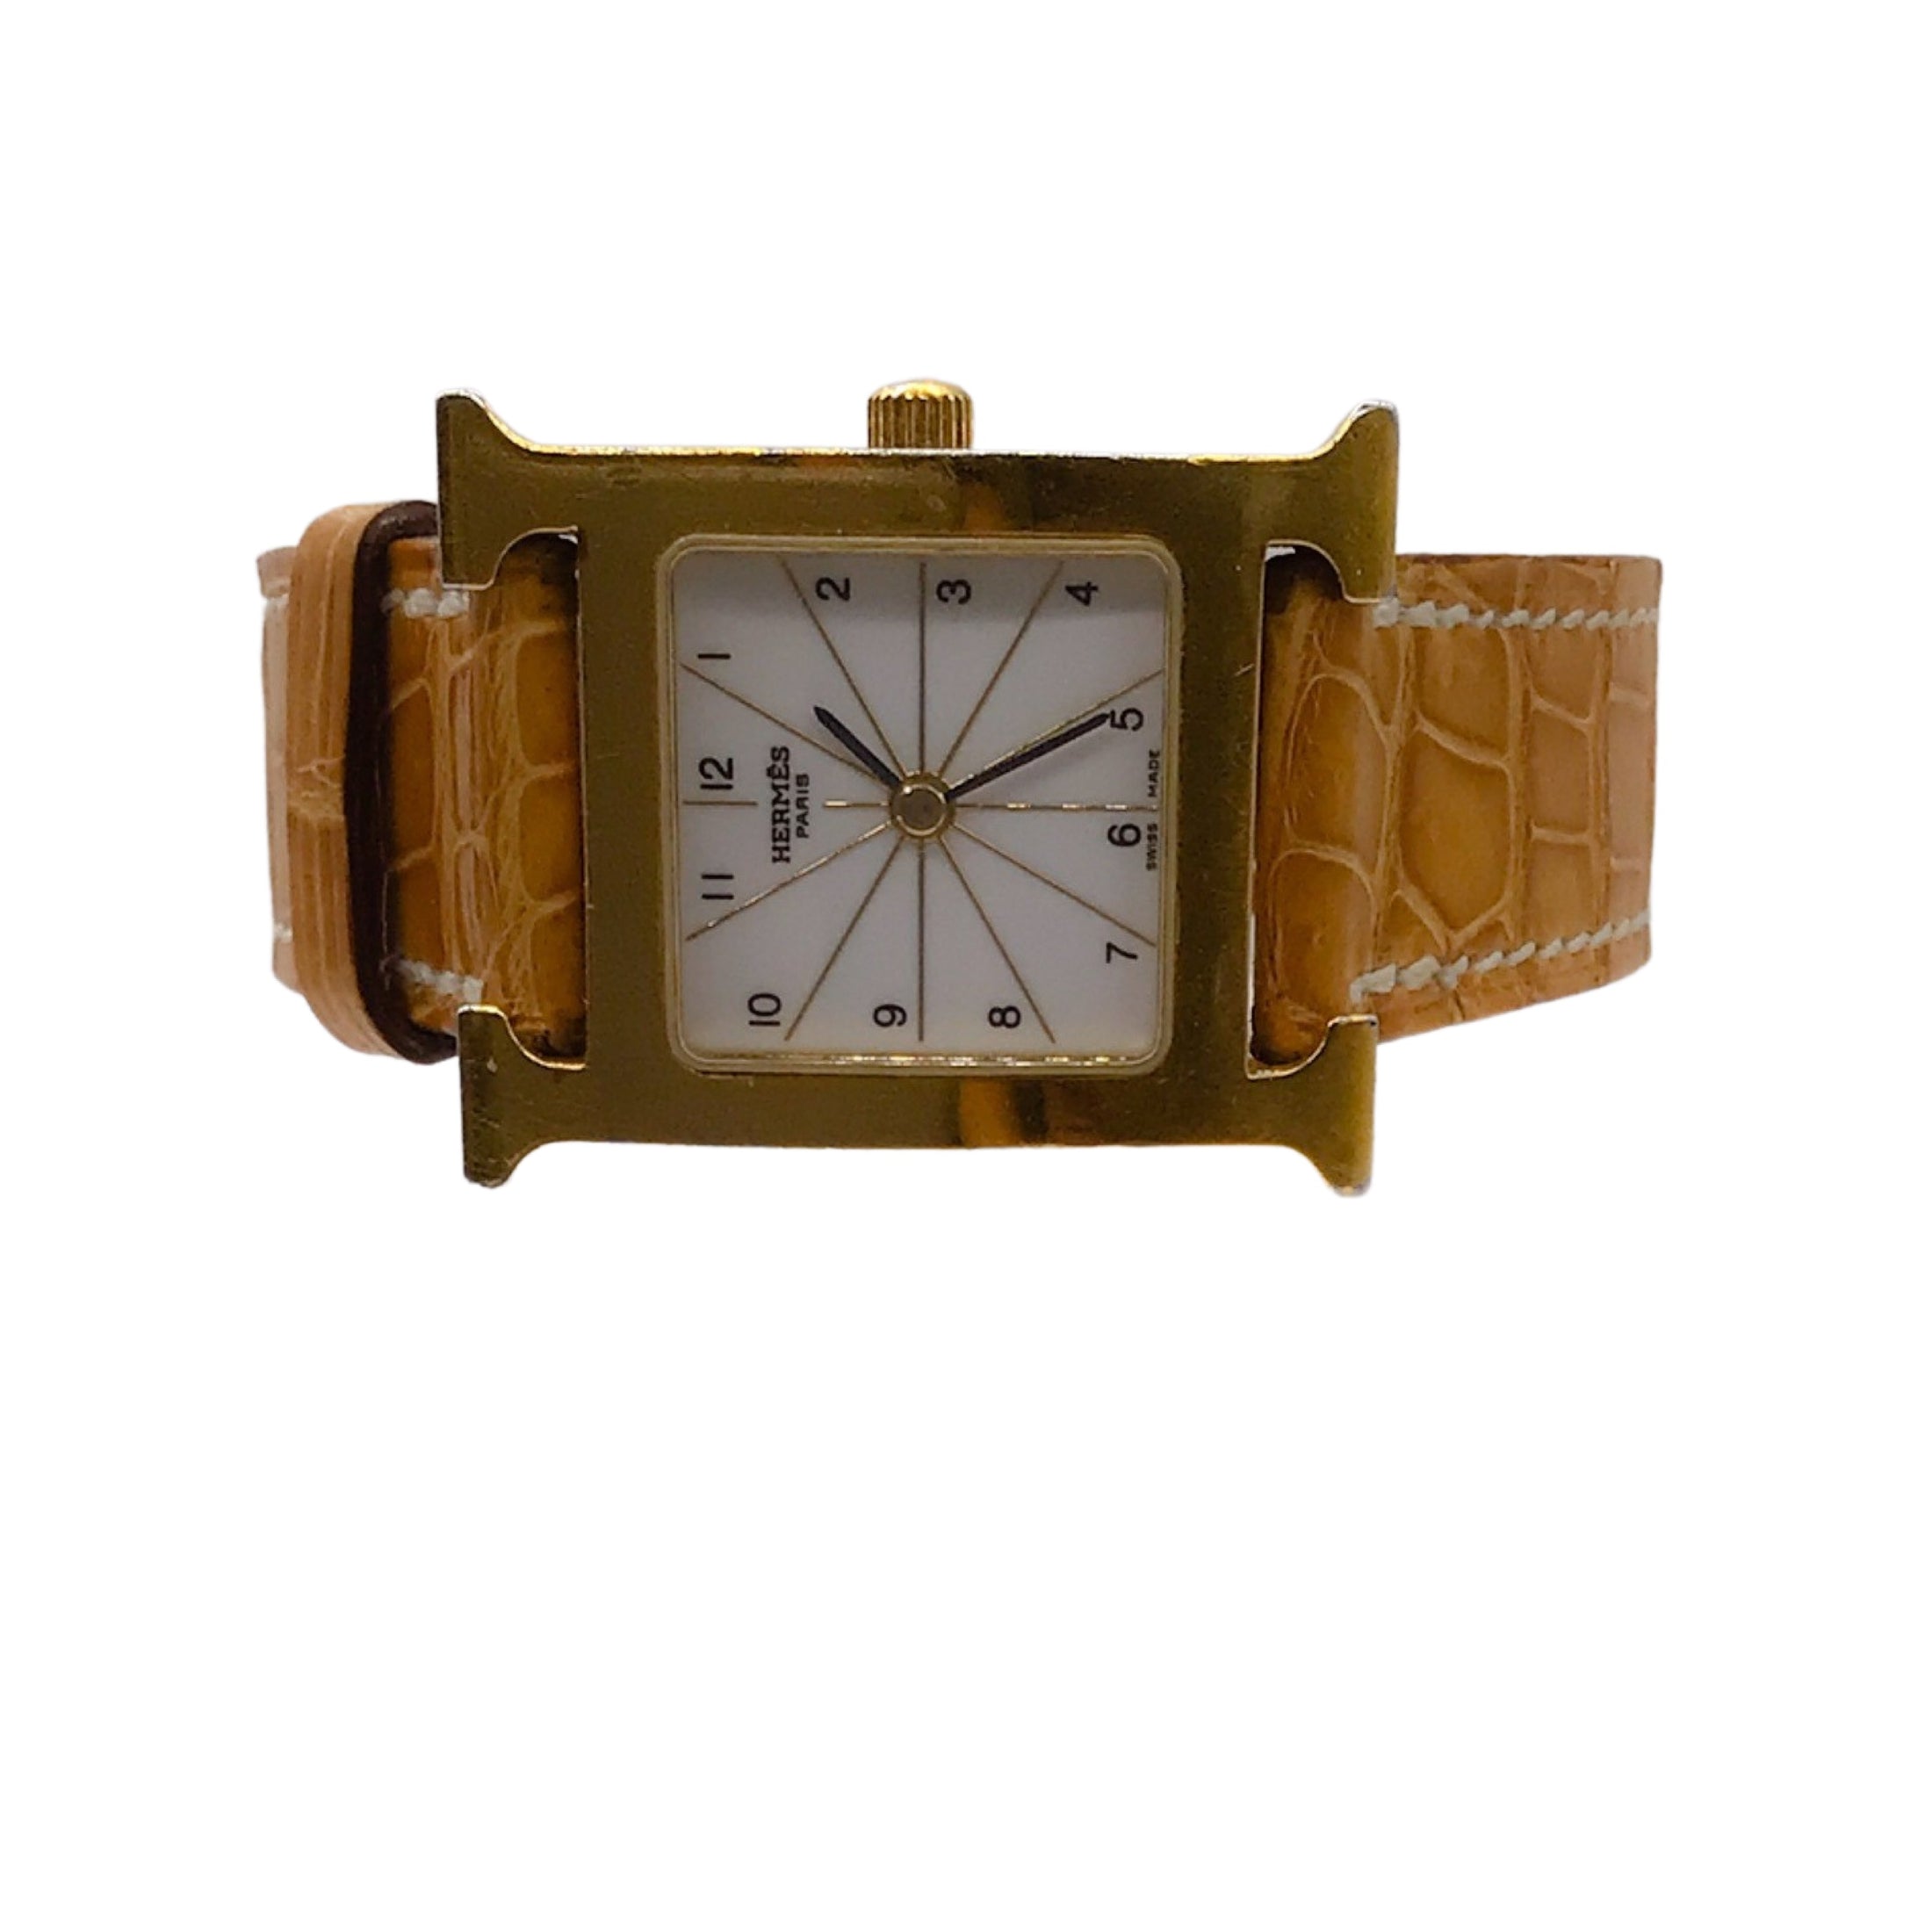 Hermes 2004 Tan / Gold Plated Crocodile Skin Leather 21mm Heure H Watch